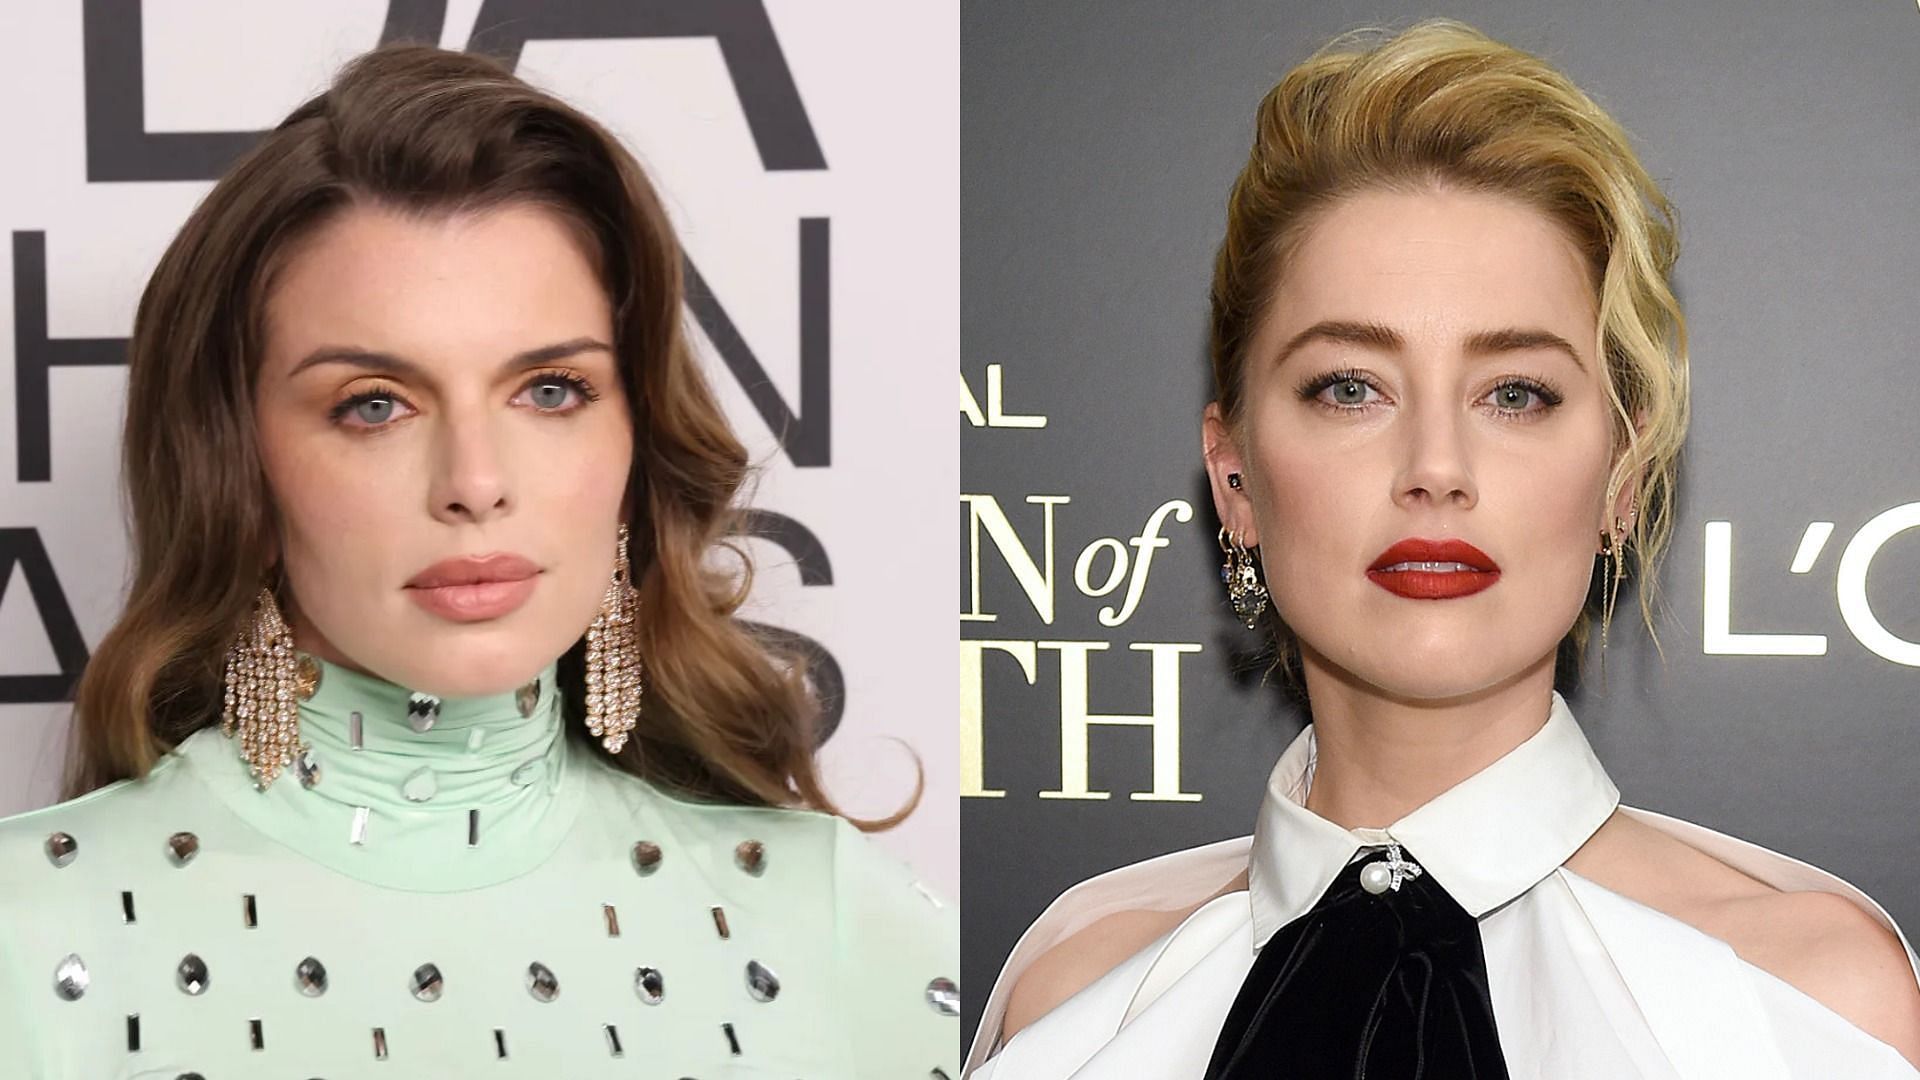 Julia Fox supported Amber Heard, stating she was 25 years old at the abuse and had no power in her relationship. (Image via Getty Images/Taylor Hill/Lawrence Busacca)